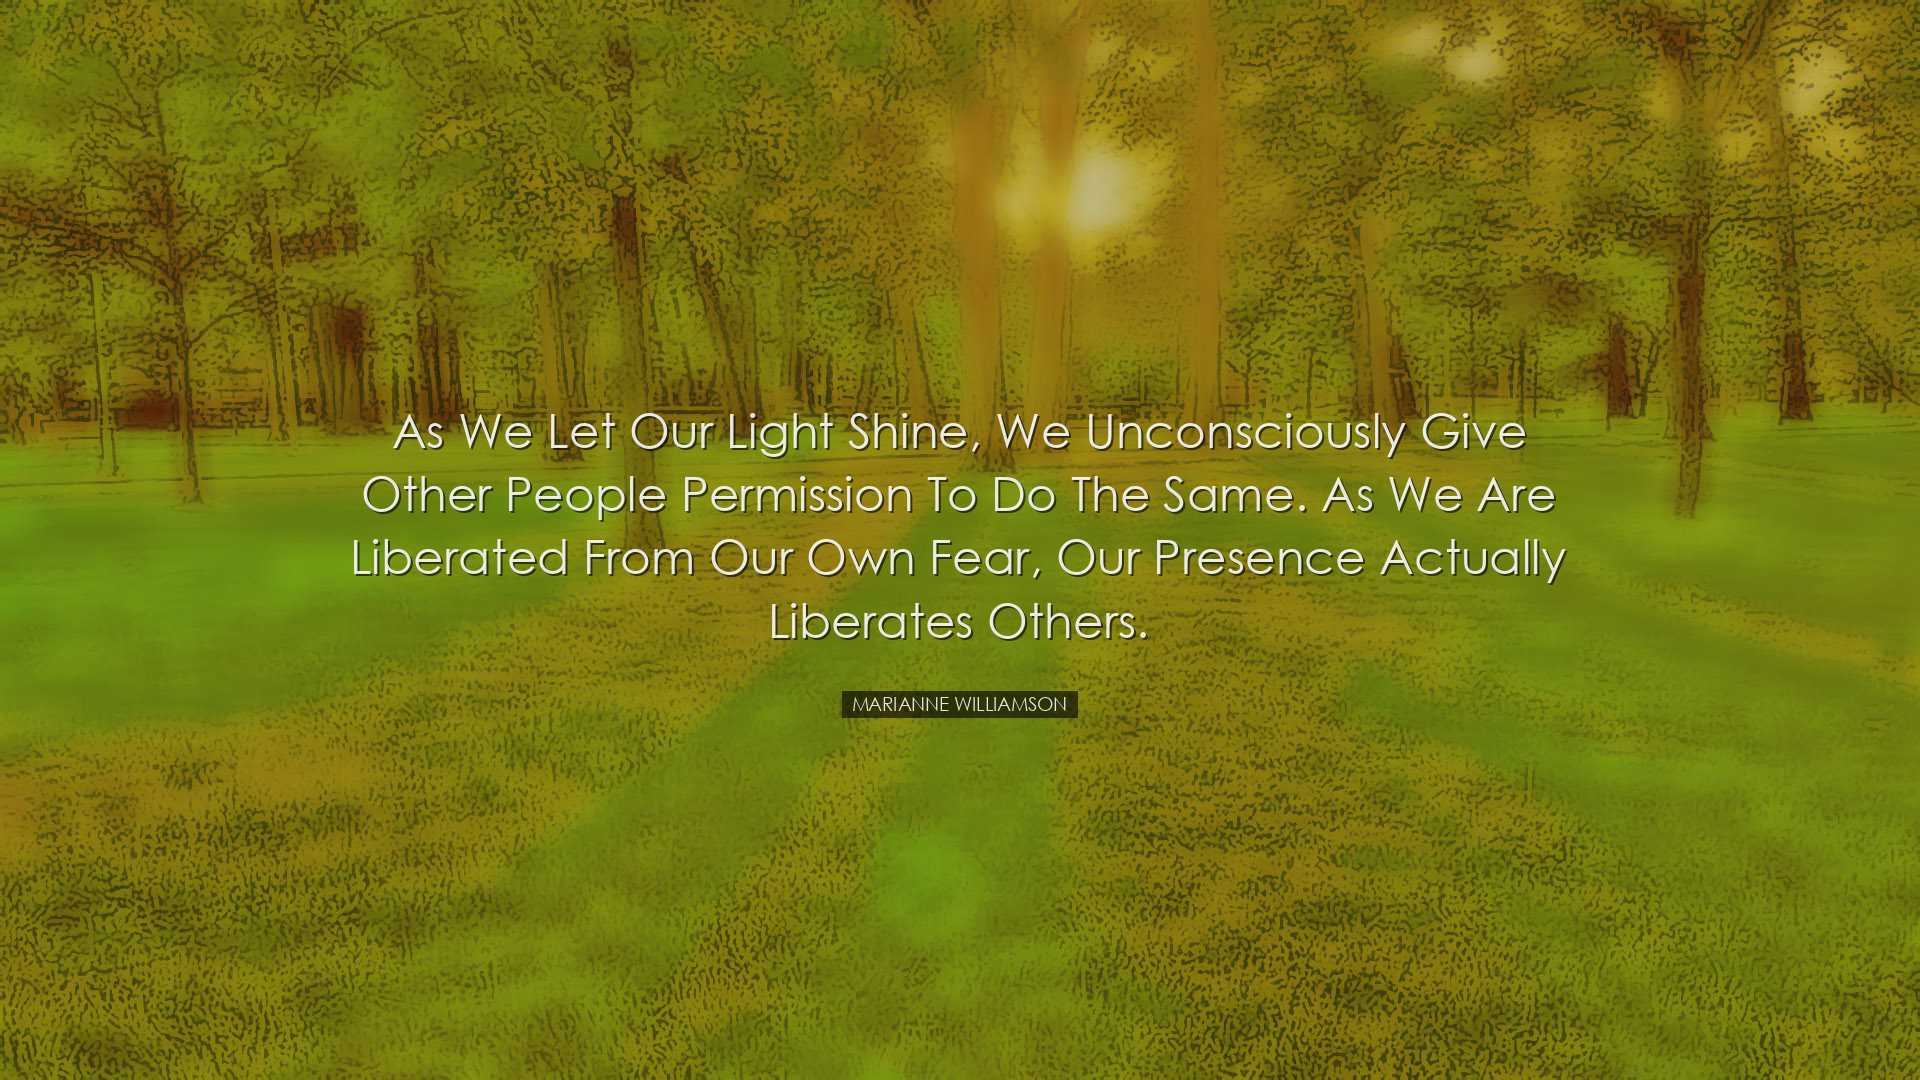 As we let our light shine, we unconsciously give other people perm